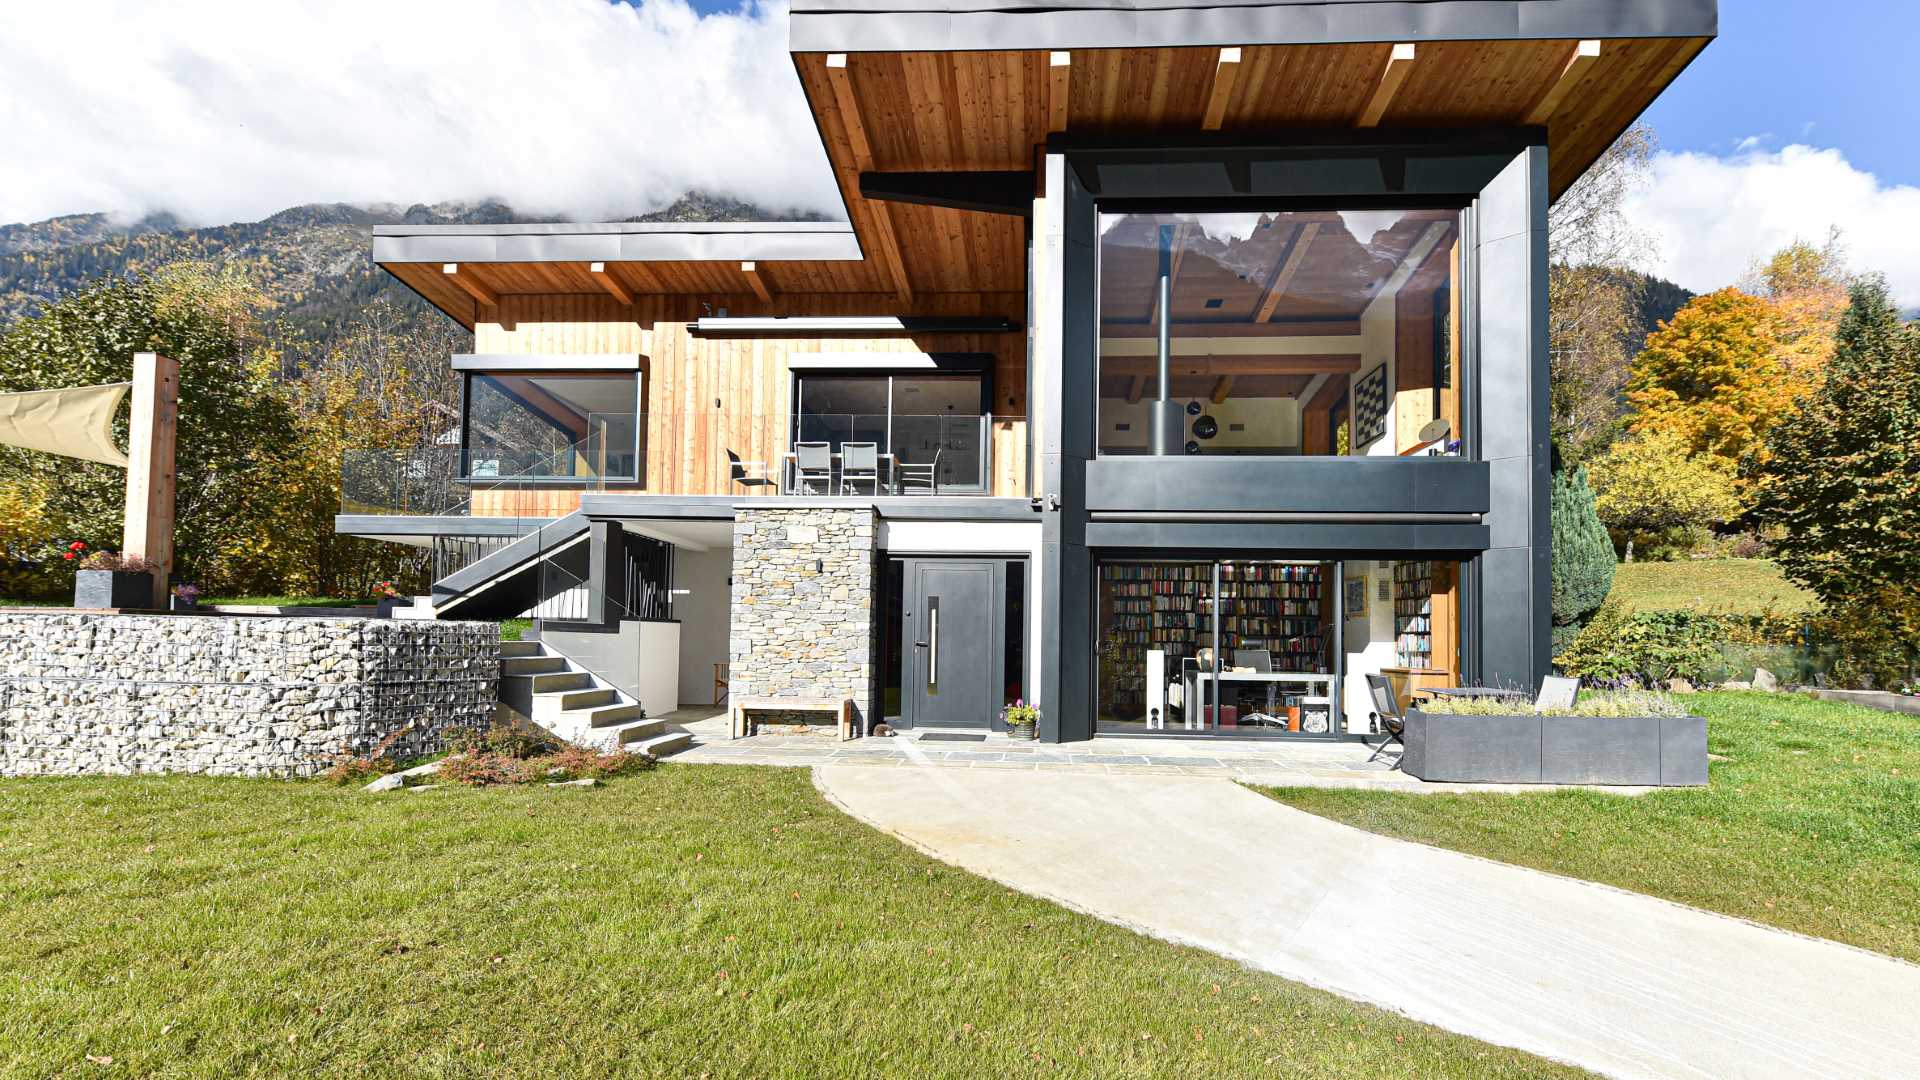 A large picture window draws attention on this modern house.